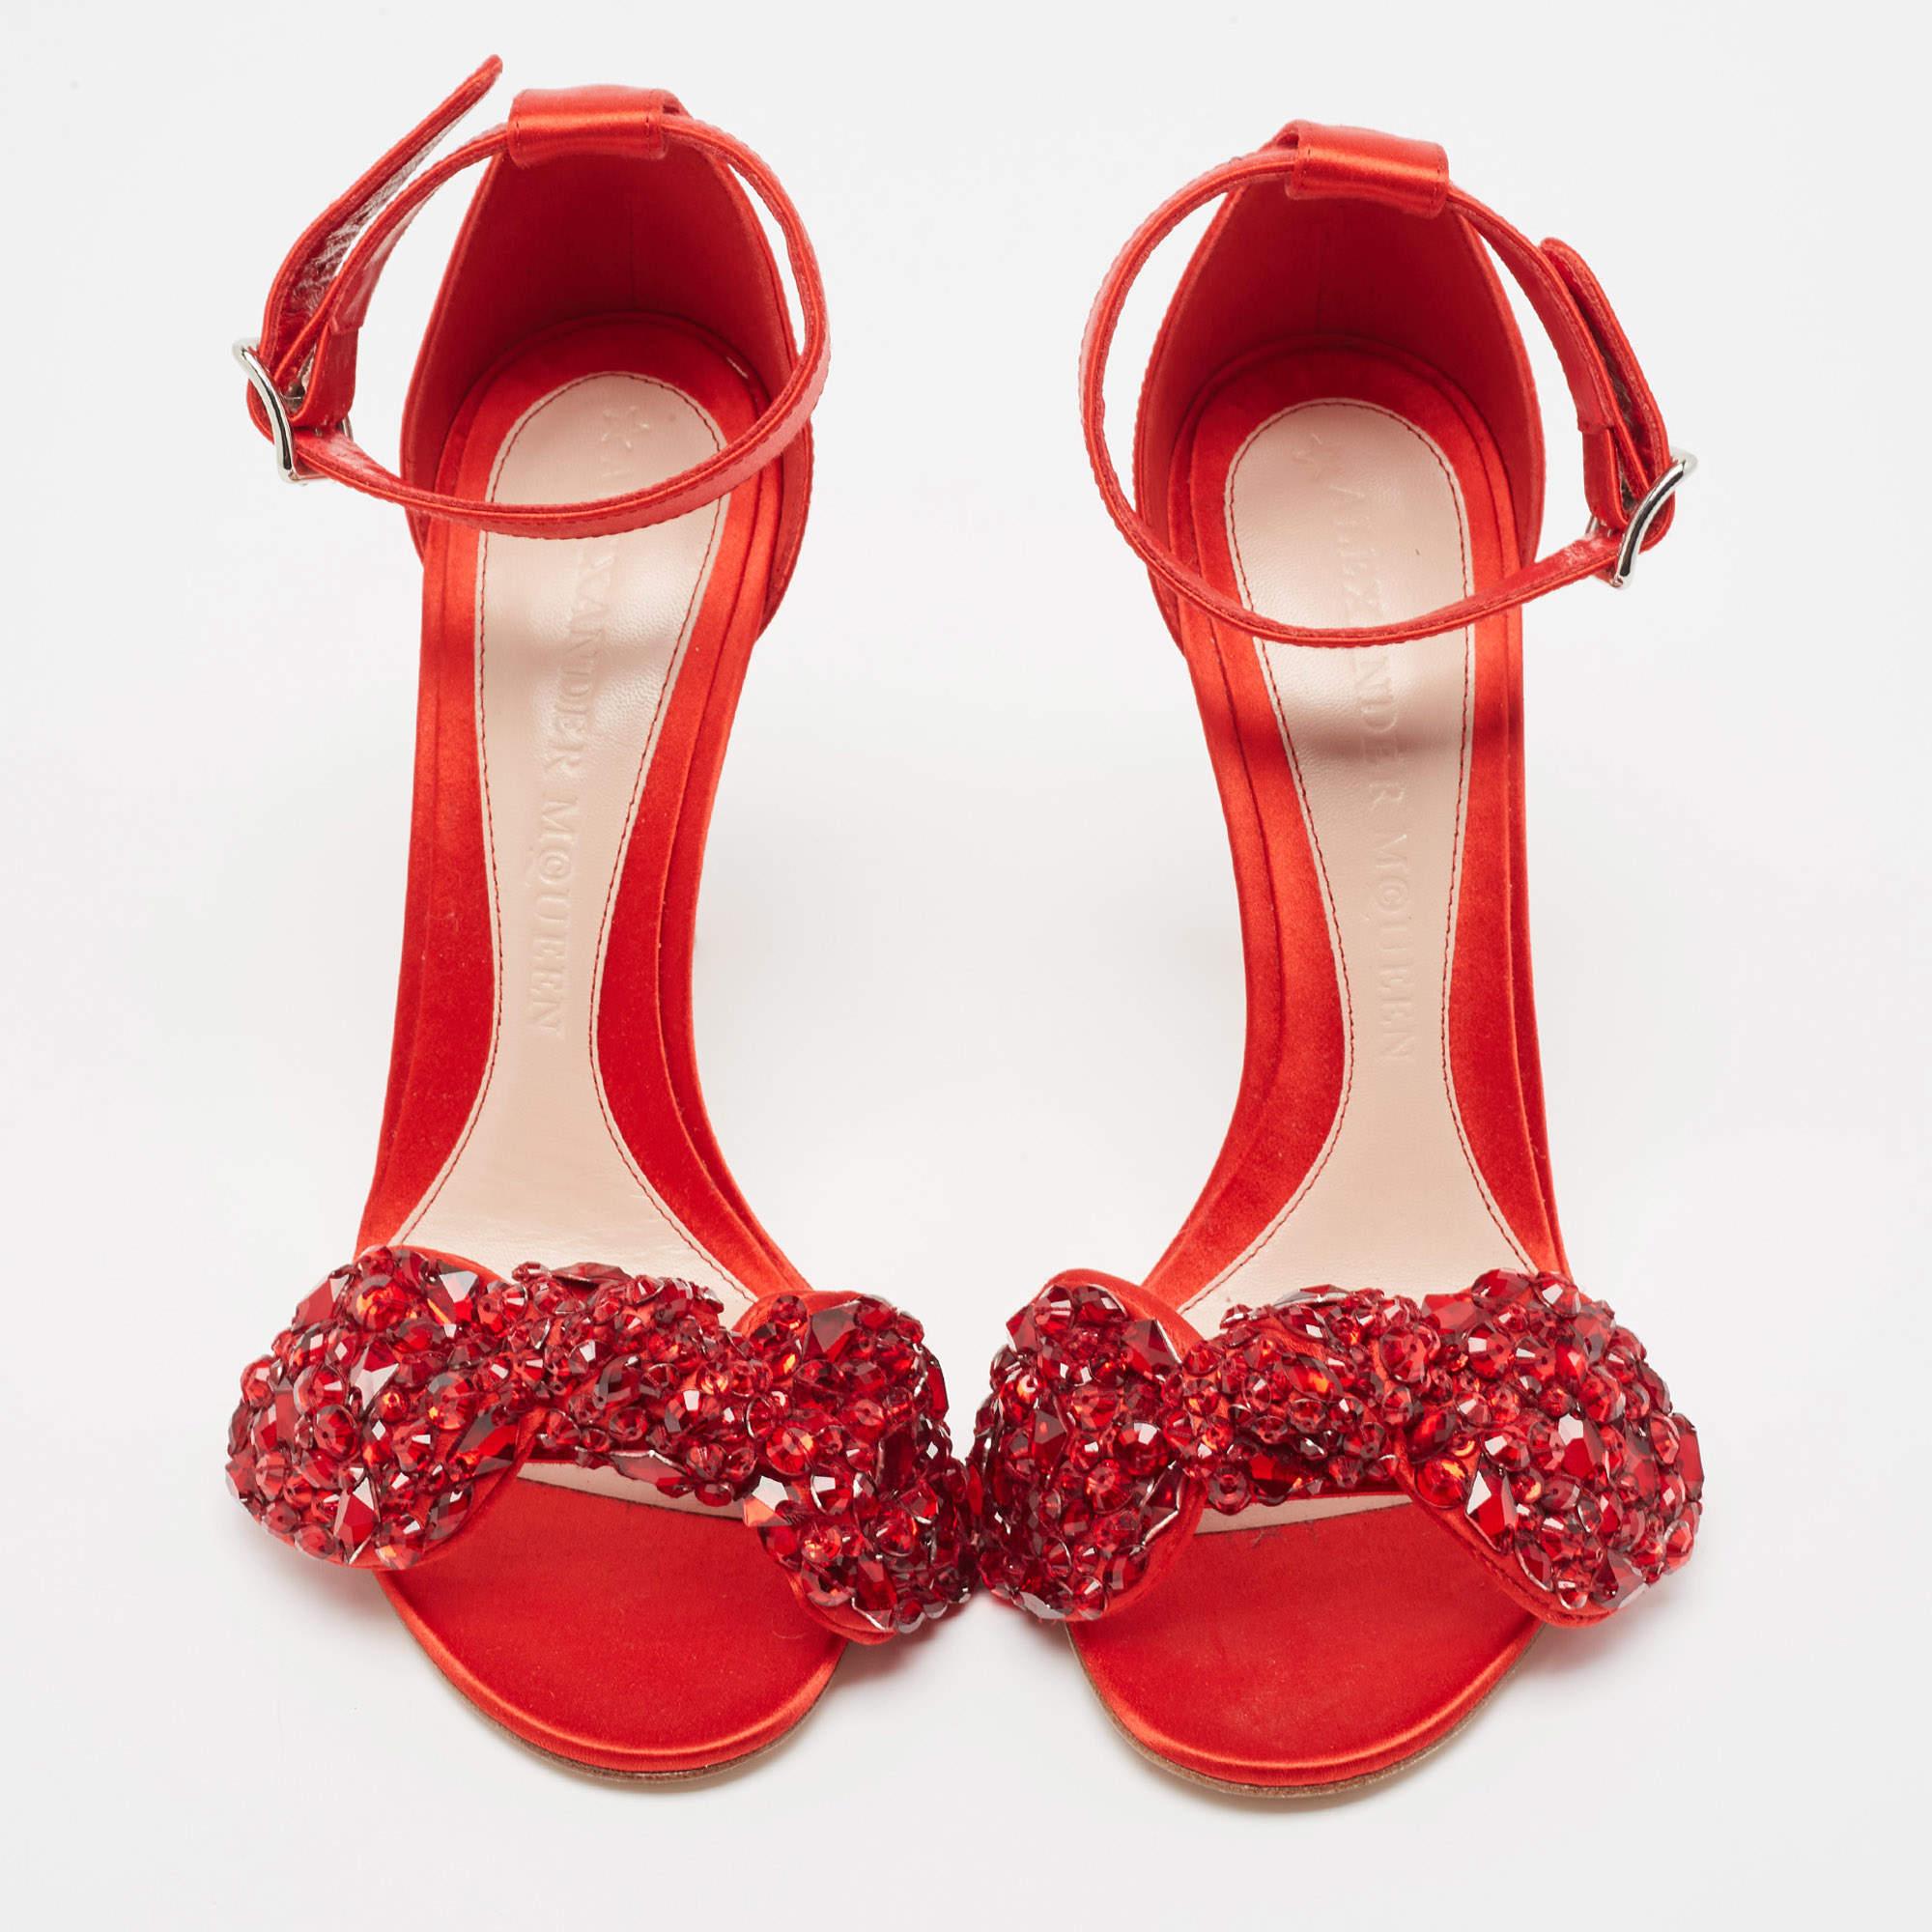 Alexander McQueen Red Satin Embellished Jewel Bow Ankle Strap Sandals Size 37 1